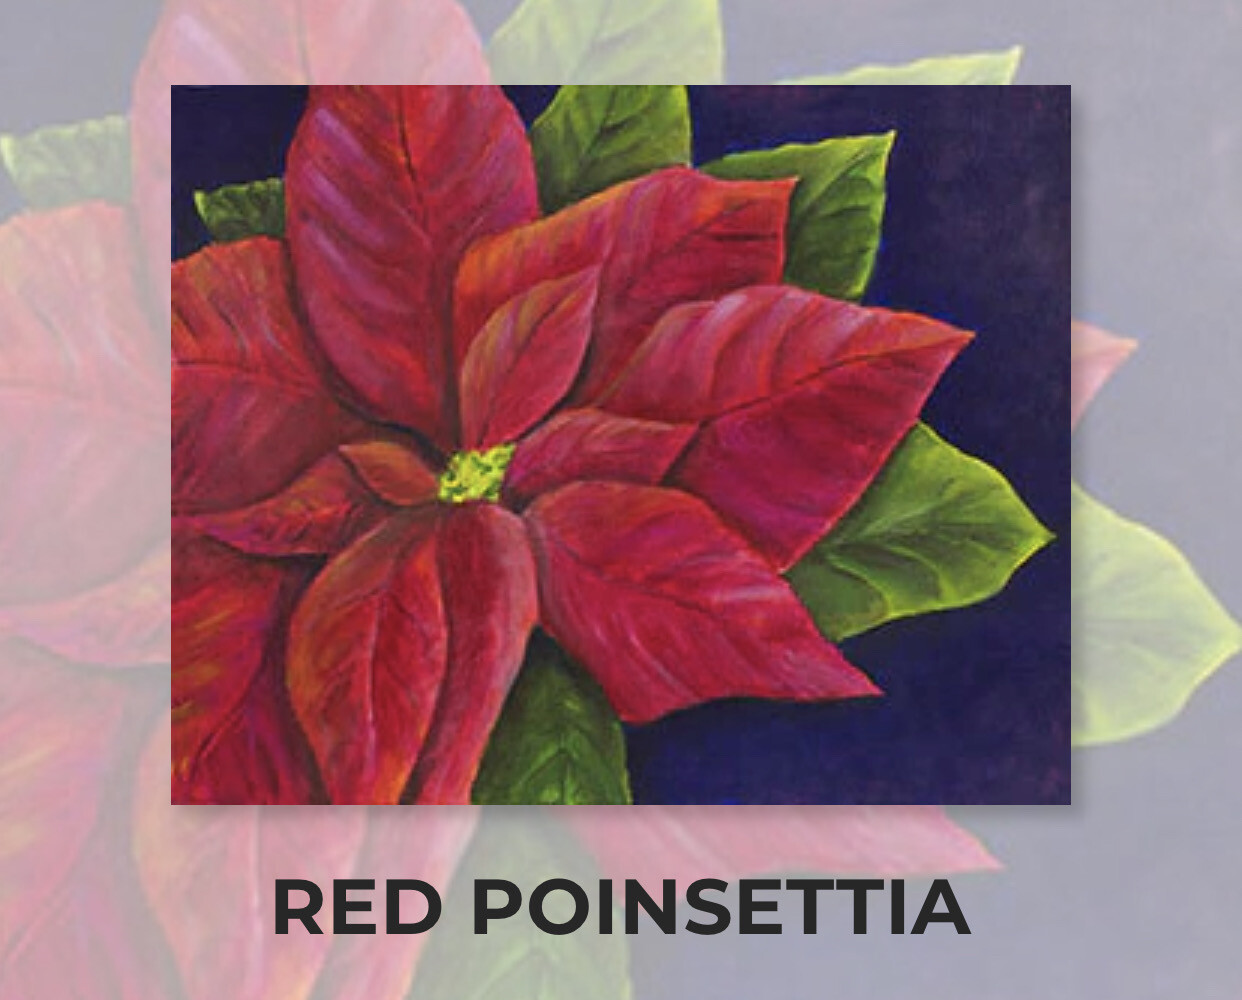 Red Poinsettia ADULT Acrylic Paint On Canvas DIY Art Kit - 3 Week Special Order